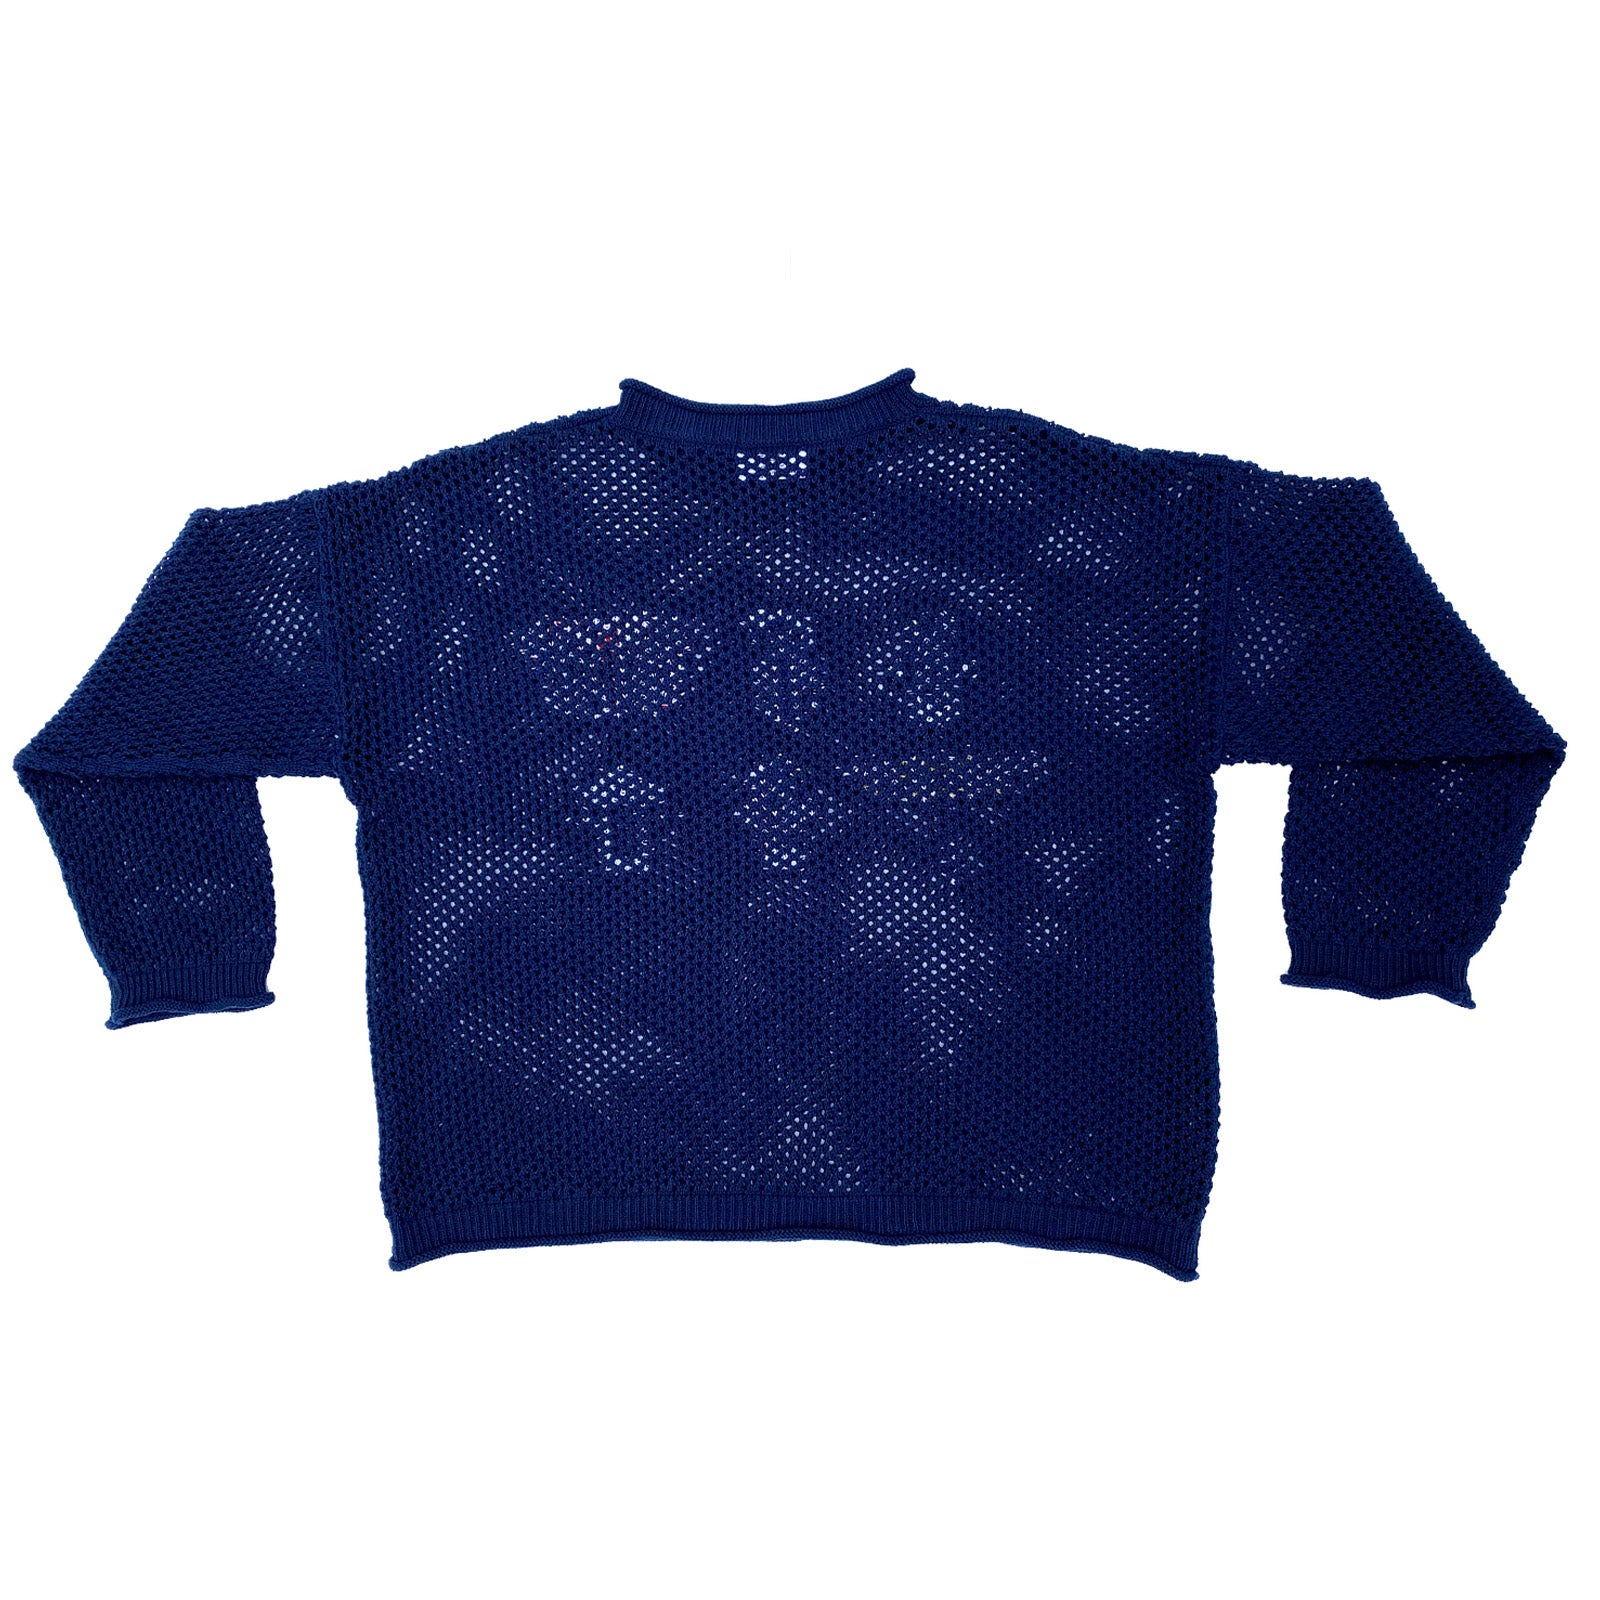 Insect Jumper - Navy